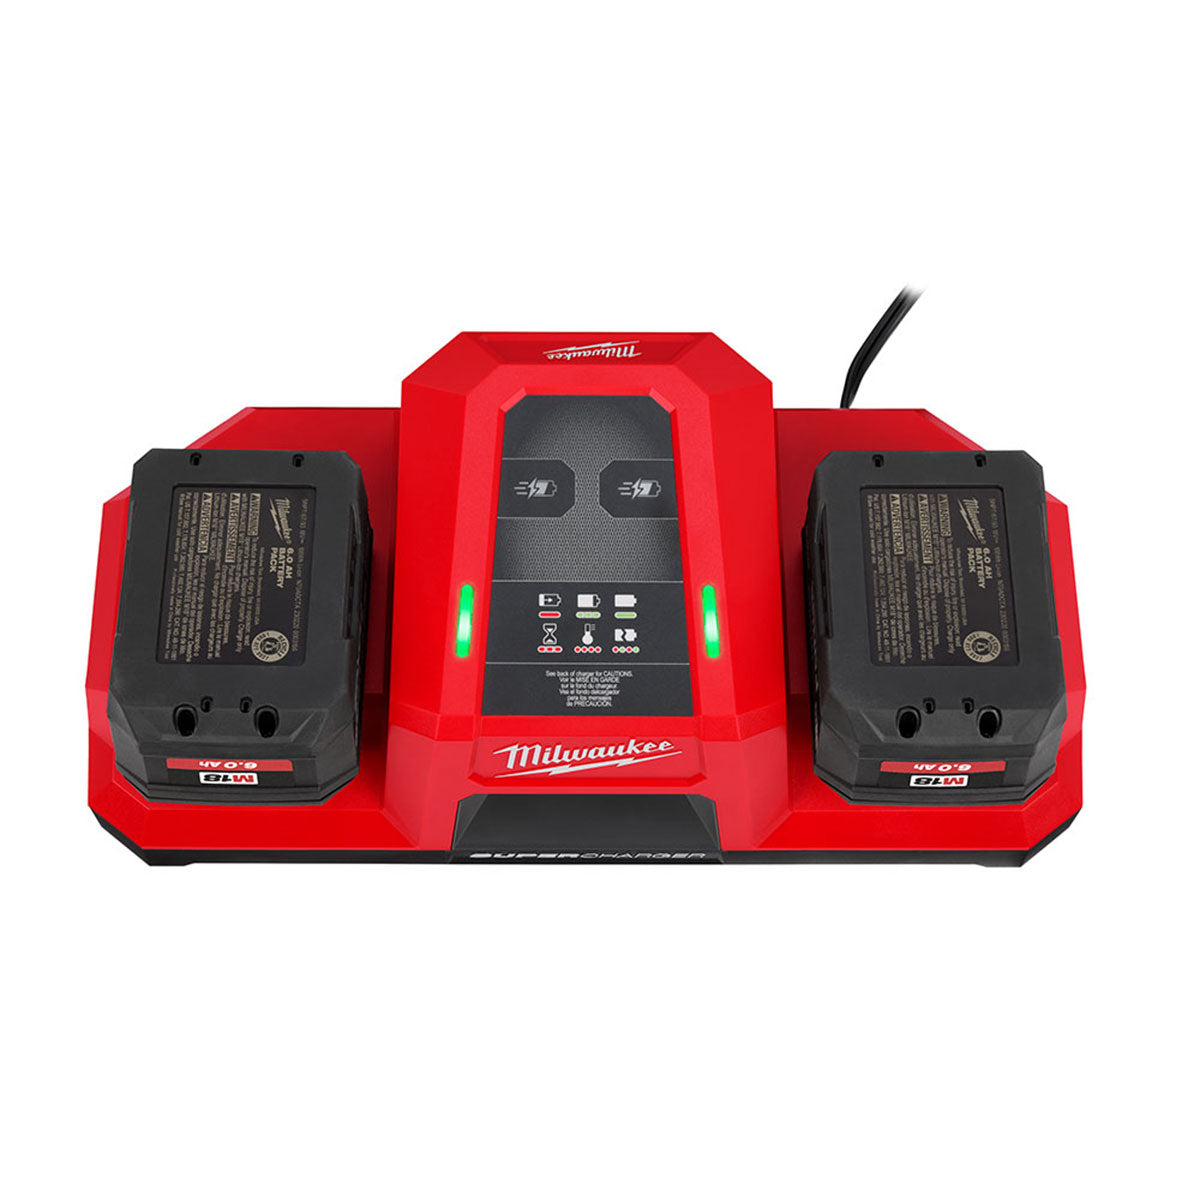 Milwaukee M18DBSC 18V Dual Bay Super Charger 4932492532